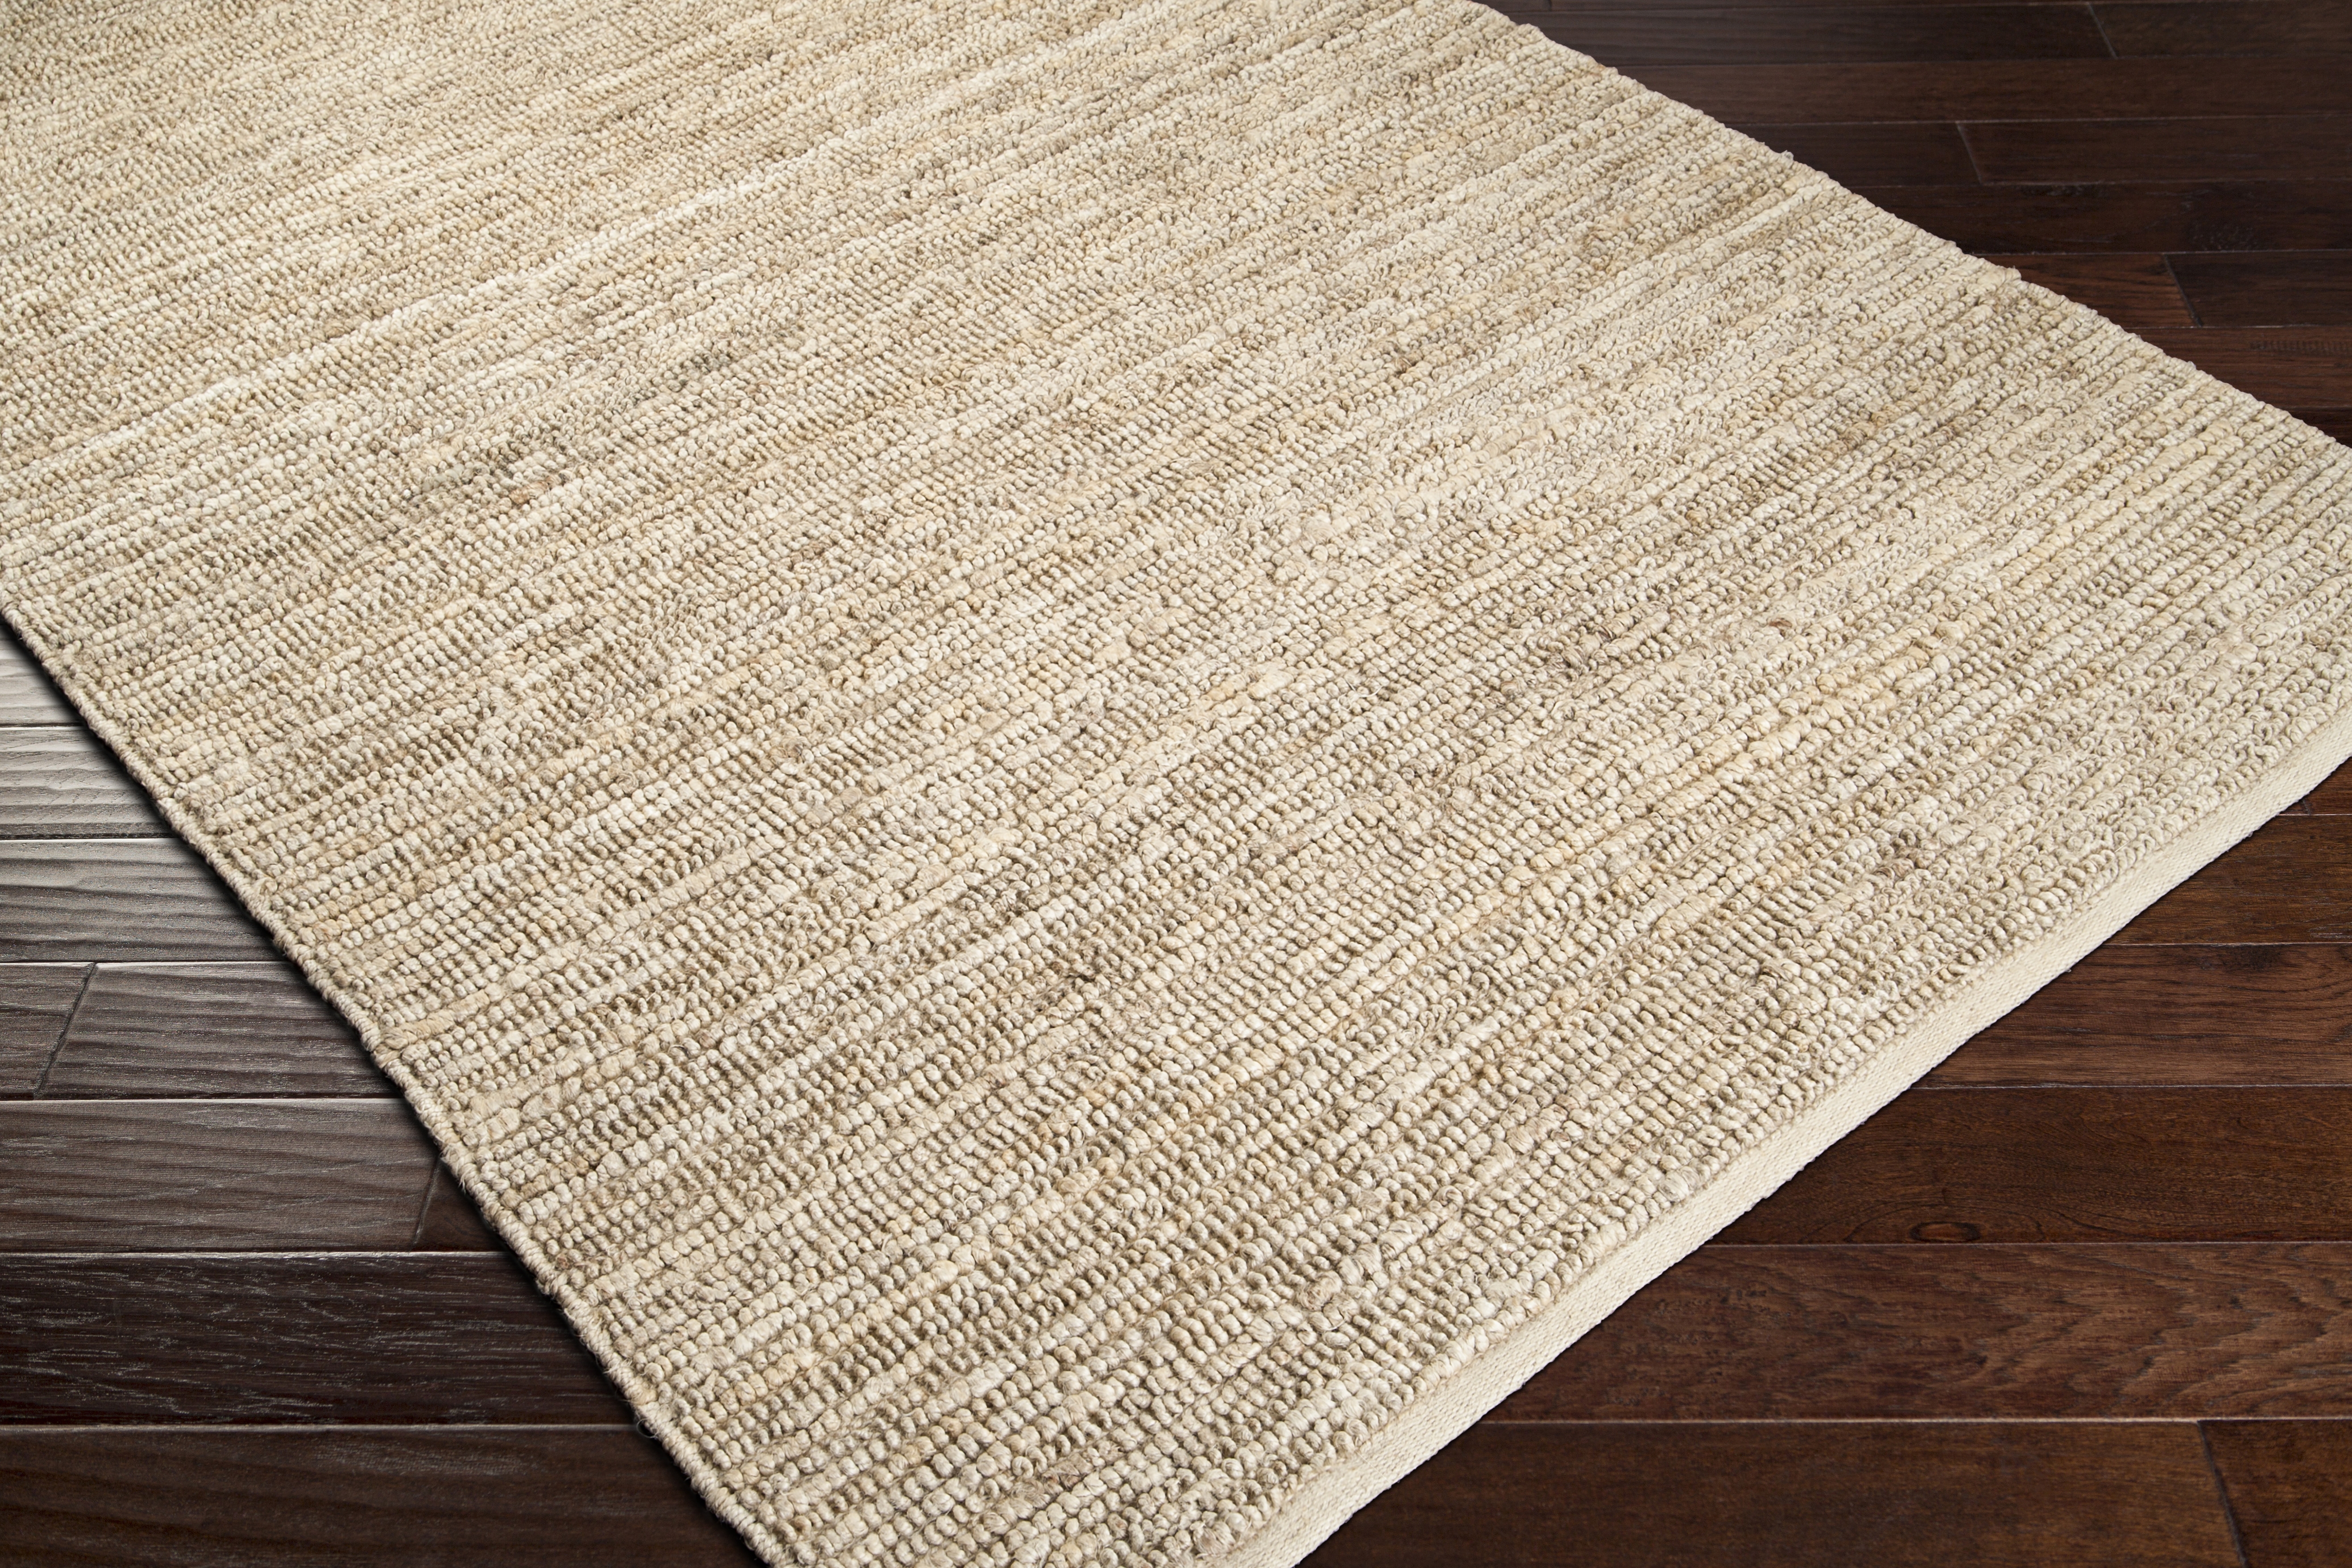 Continental Rug, 6' x 9' - Image 6